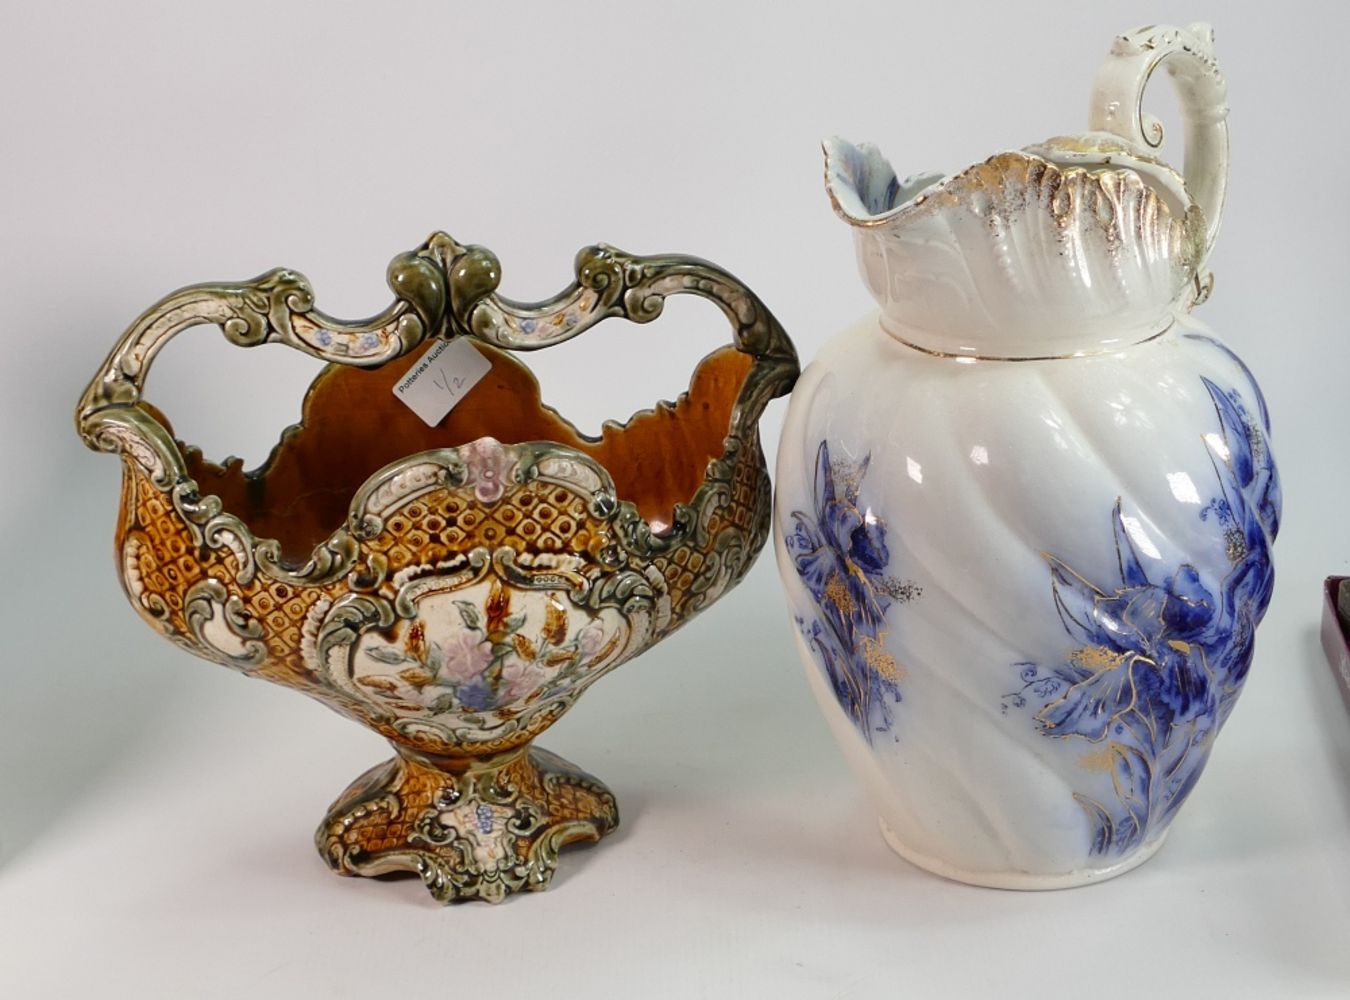 Two Day Online Auction of 20th Century Pottery, Antiques, Furniture, Jewellery & Collectibles. Day 1: Lots 1-498 Day 2: Lots 499-1086